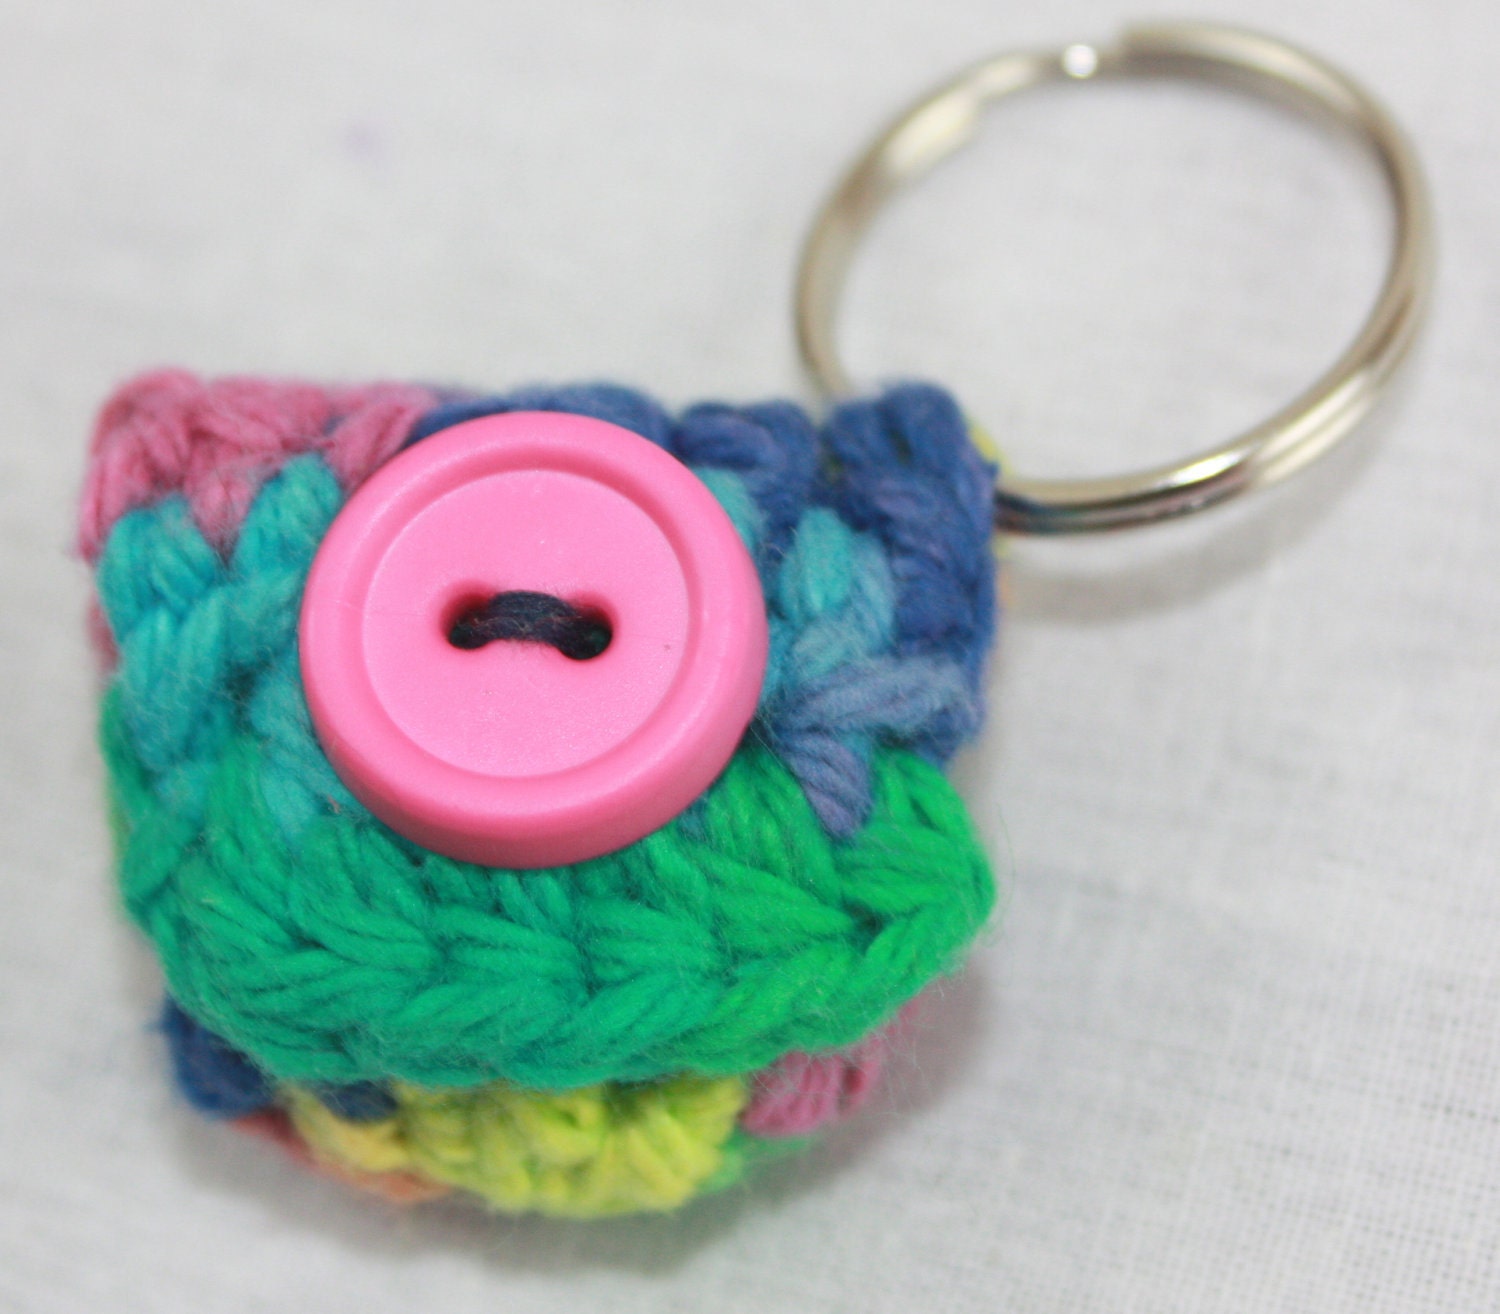 Items similar to Mini Keychain Coin Purse - Crocheted on Etsy